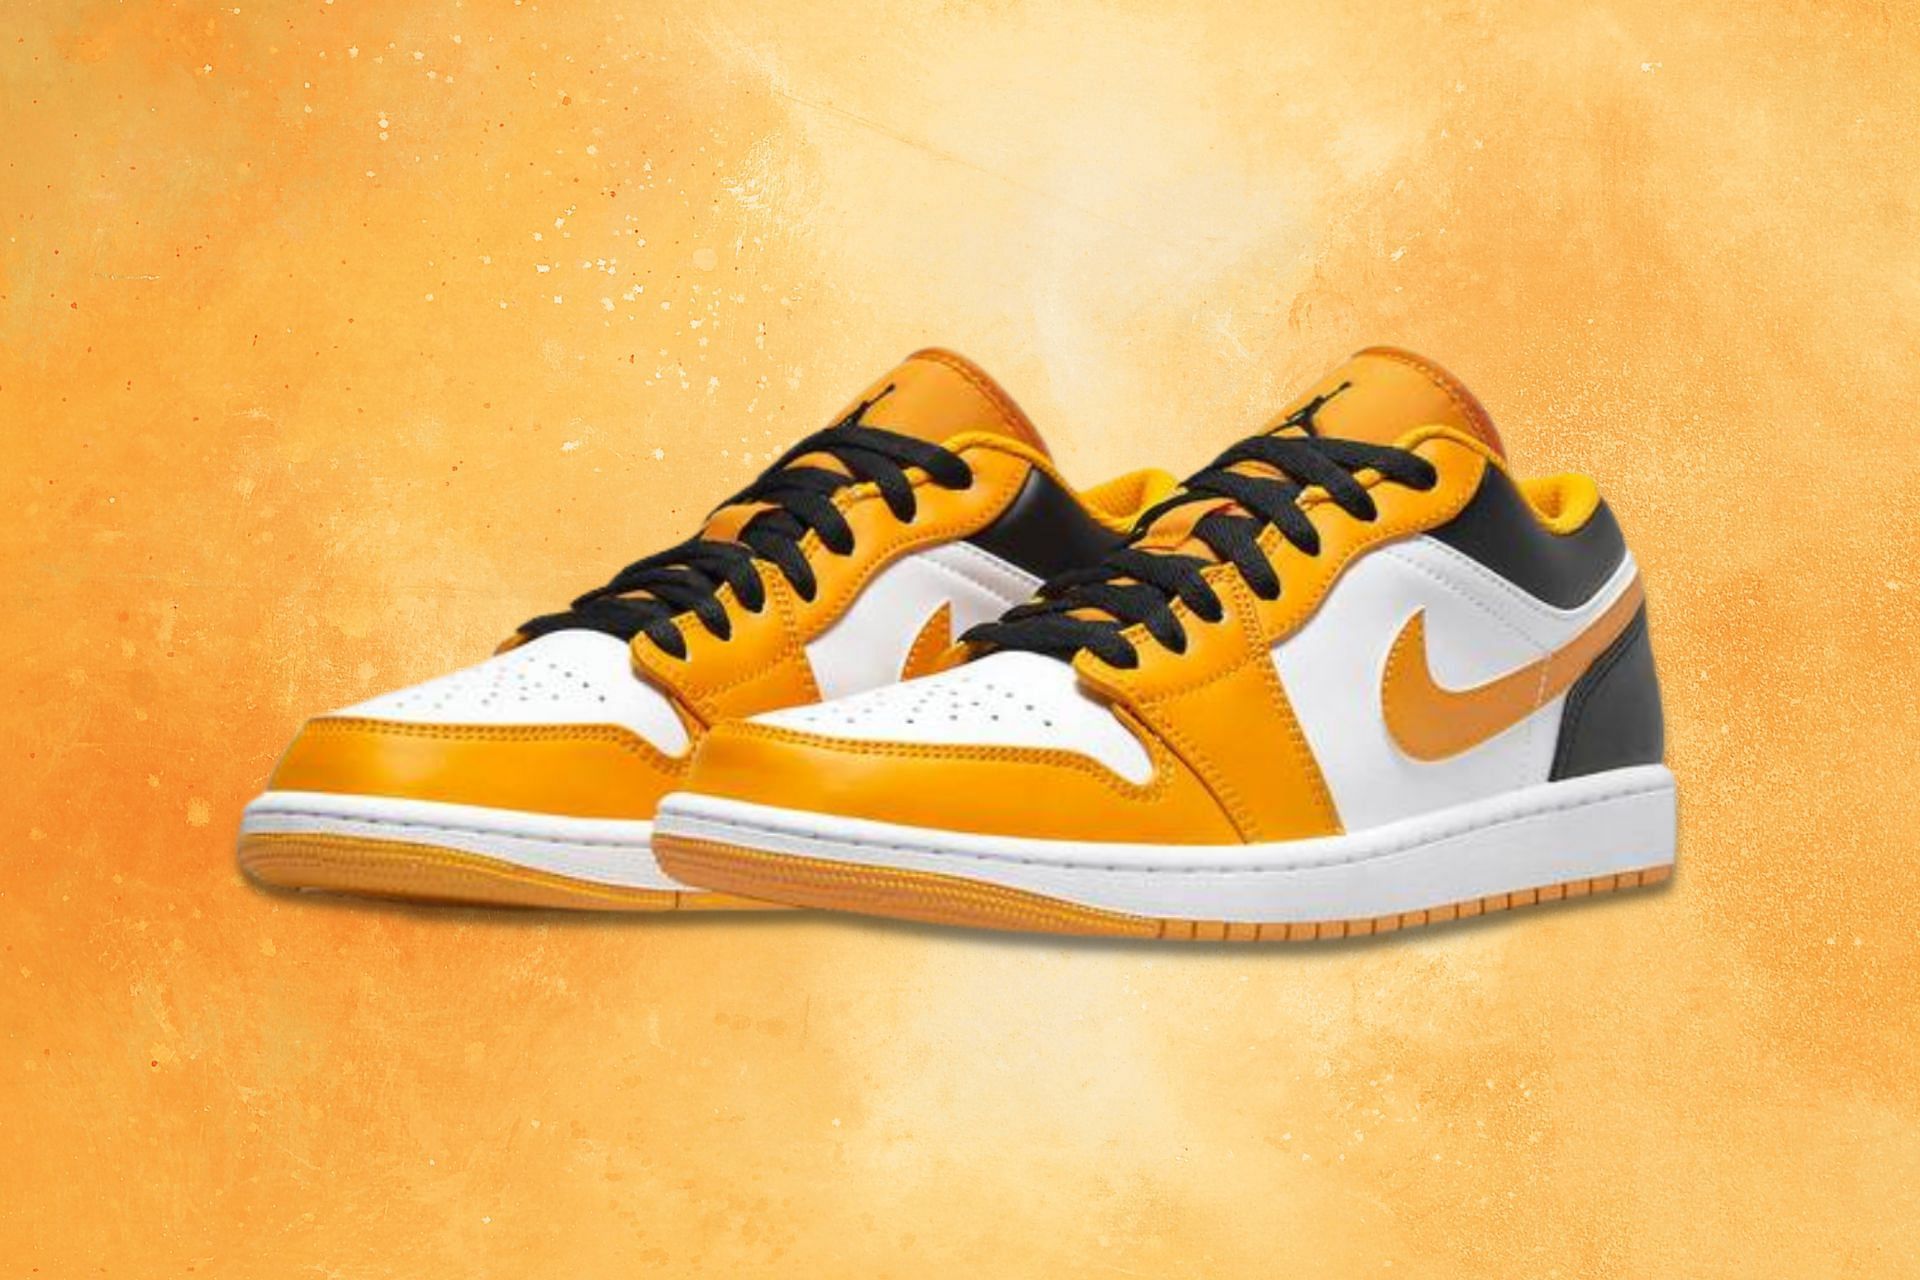 Where to buy Air Jordan 1 Low “Taxi” colorway? Price and more details ...